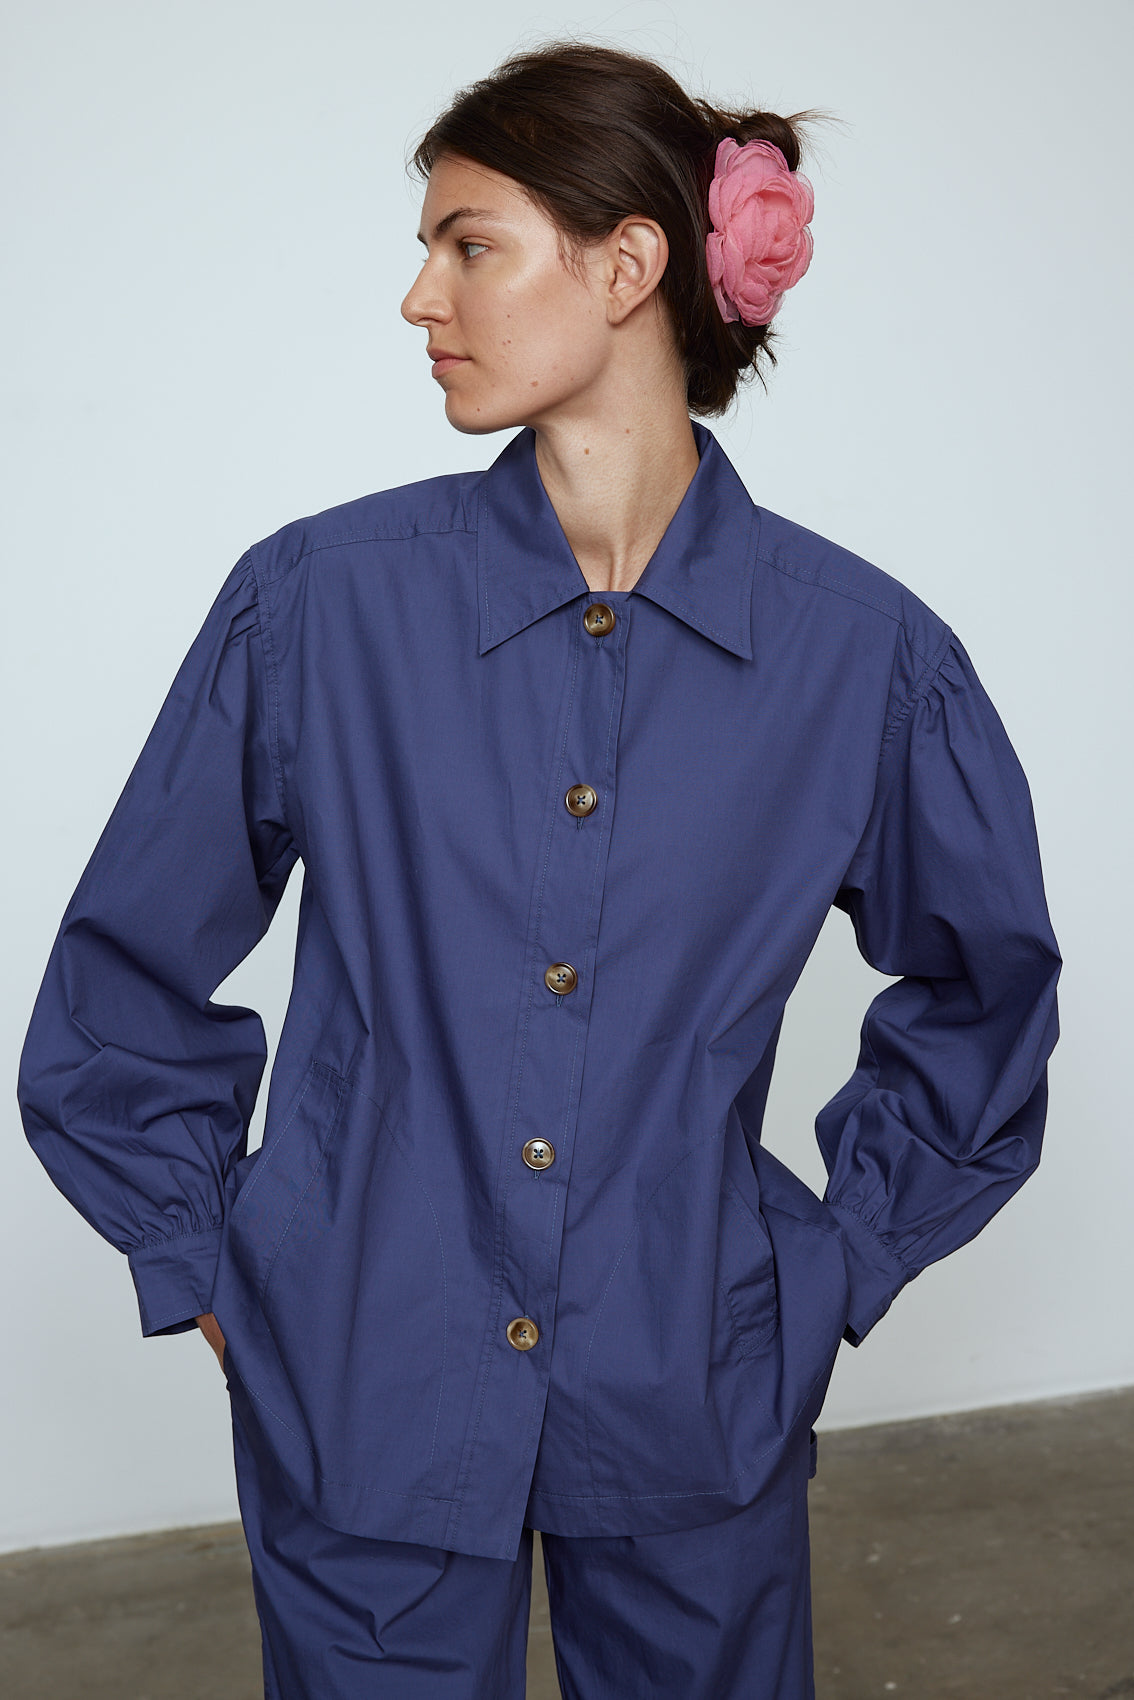 The Hannah shirt is an oversized cotton poplin style. It has big sleeves and a button closing at the front.  Style it with matching Hannah pants or jeans, or wear it open over a t-shirt or tank top.  Material: 100% cotton.  The model is 179cm (5'10") and wears size S.